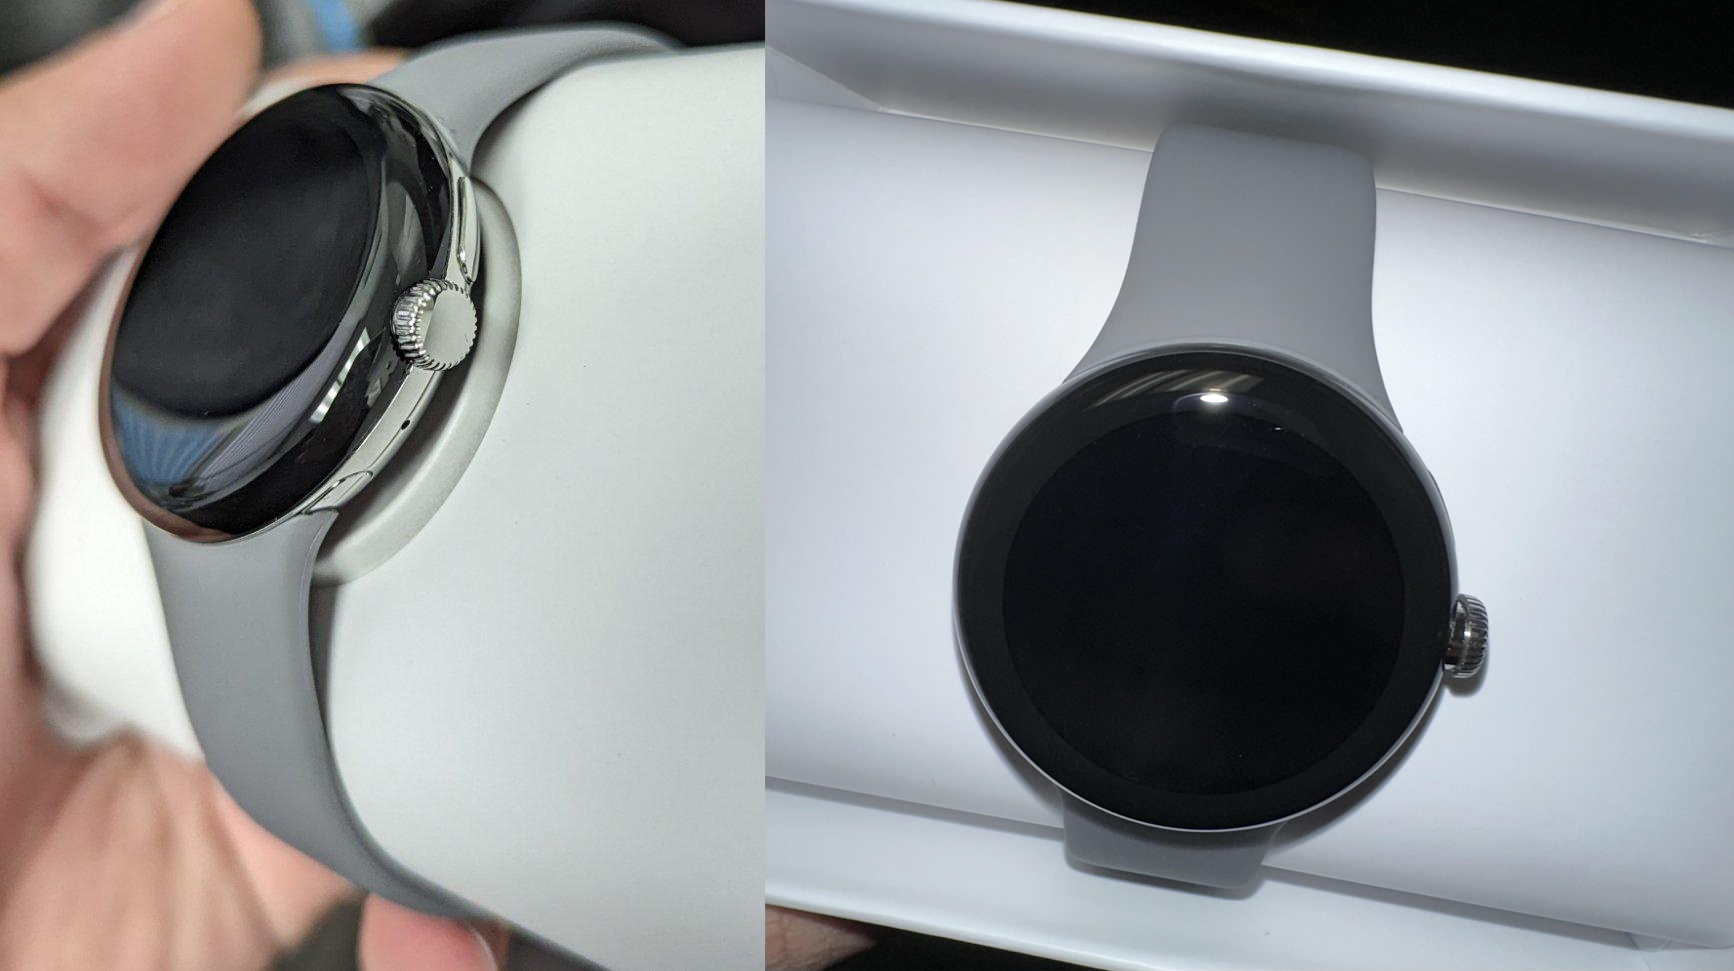 Early Pixel Watch unboxing images leak online